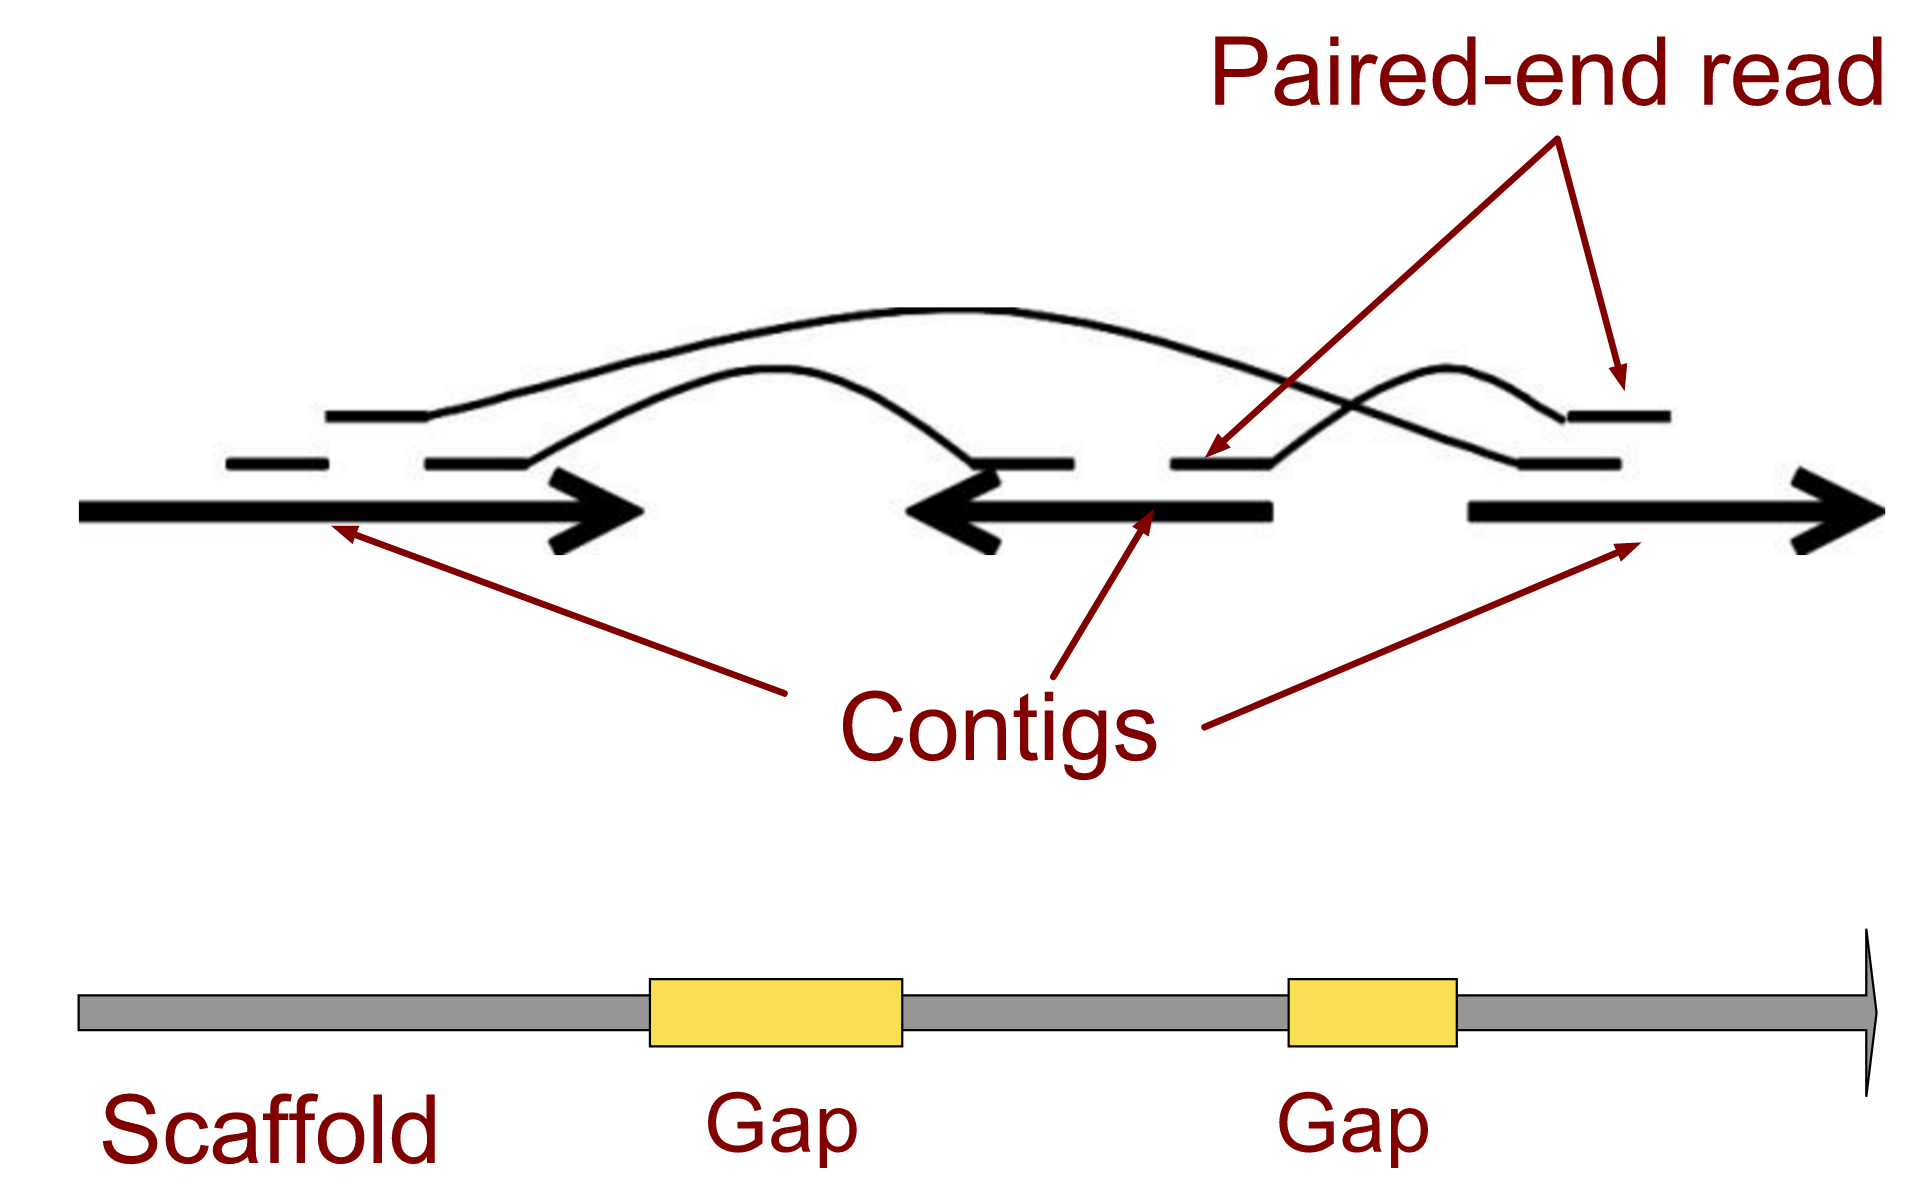 A scaffold with gaps as yellow boxes is shown. Above is a set of contigs and paired-end reads shown bridging the gaps.